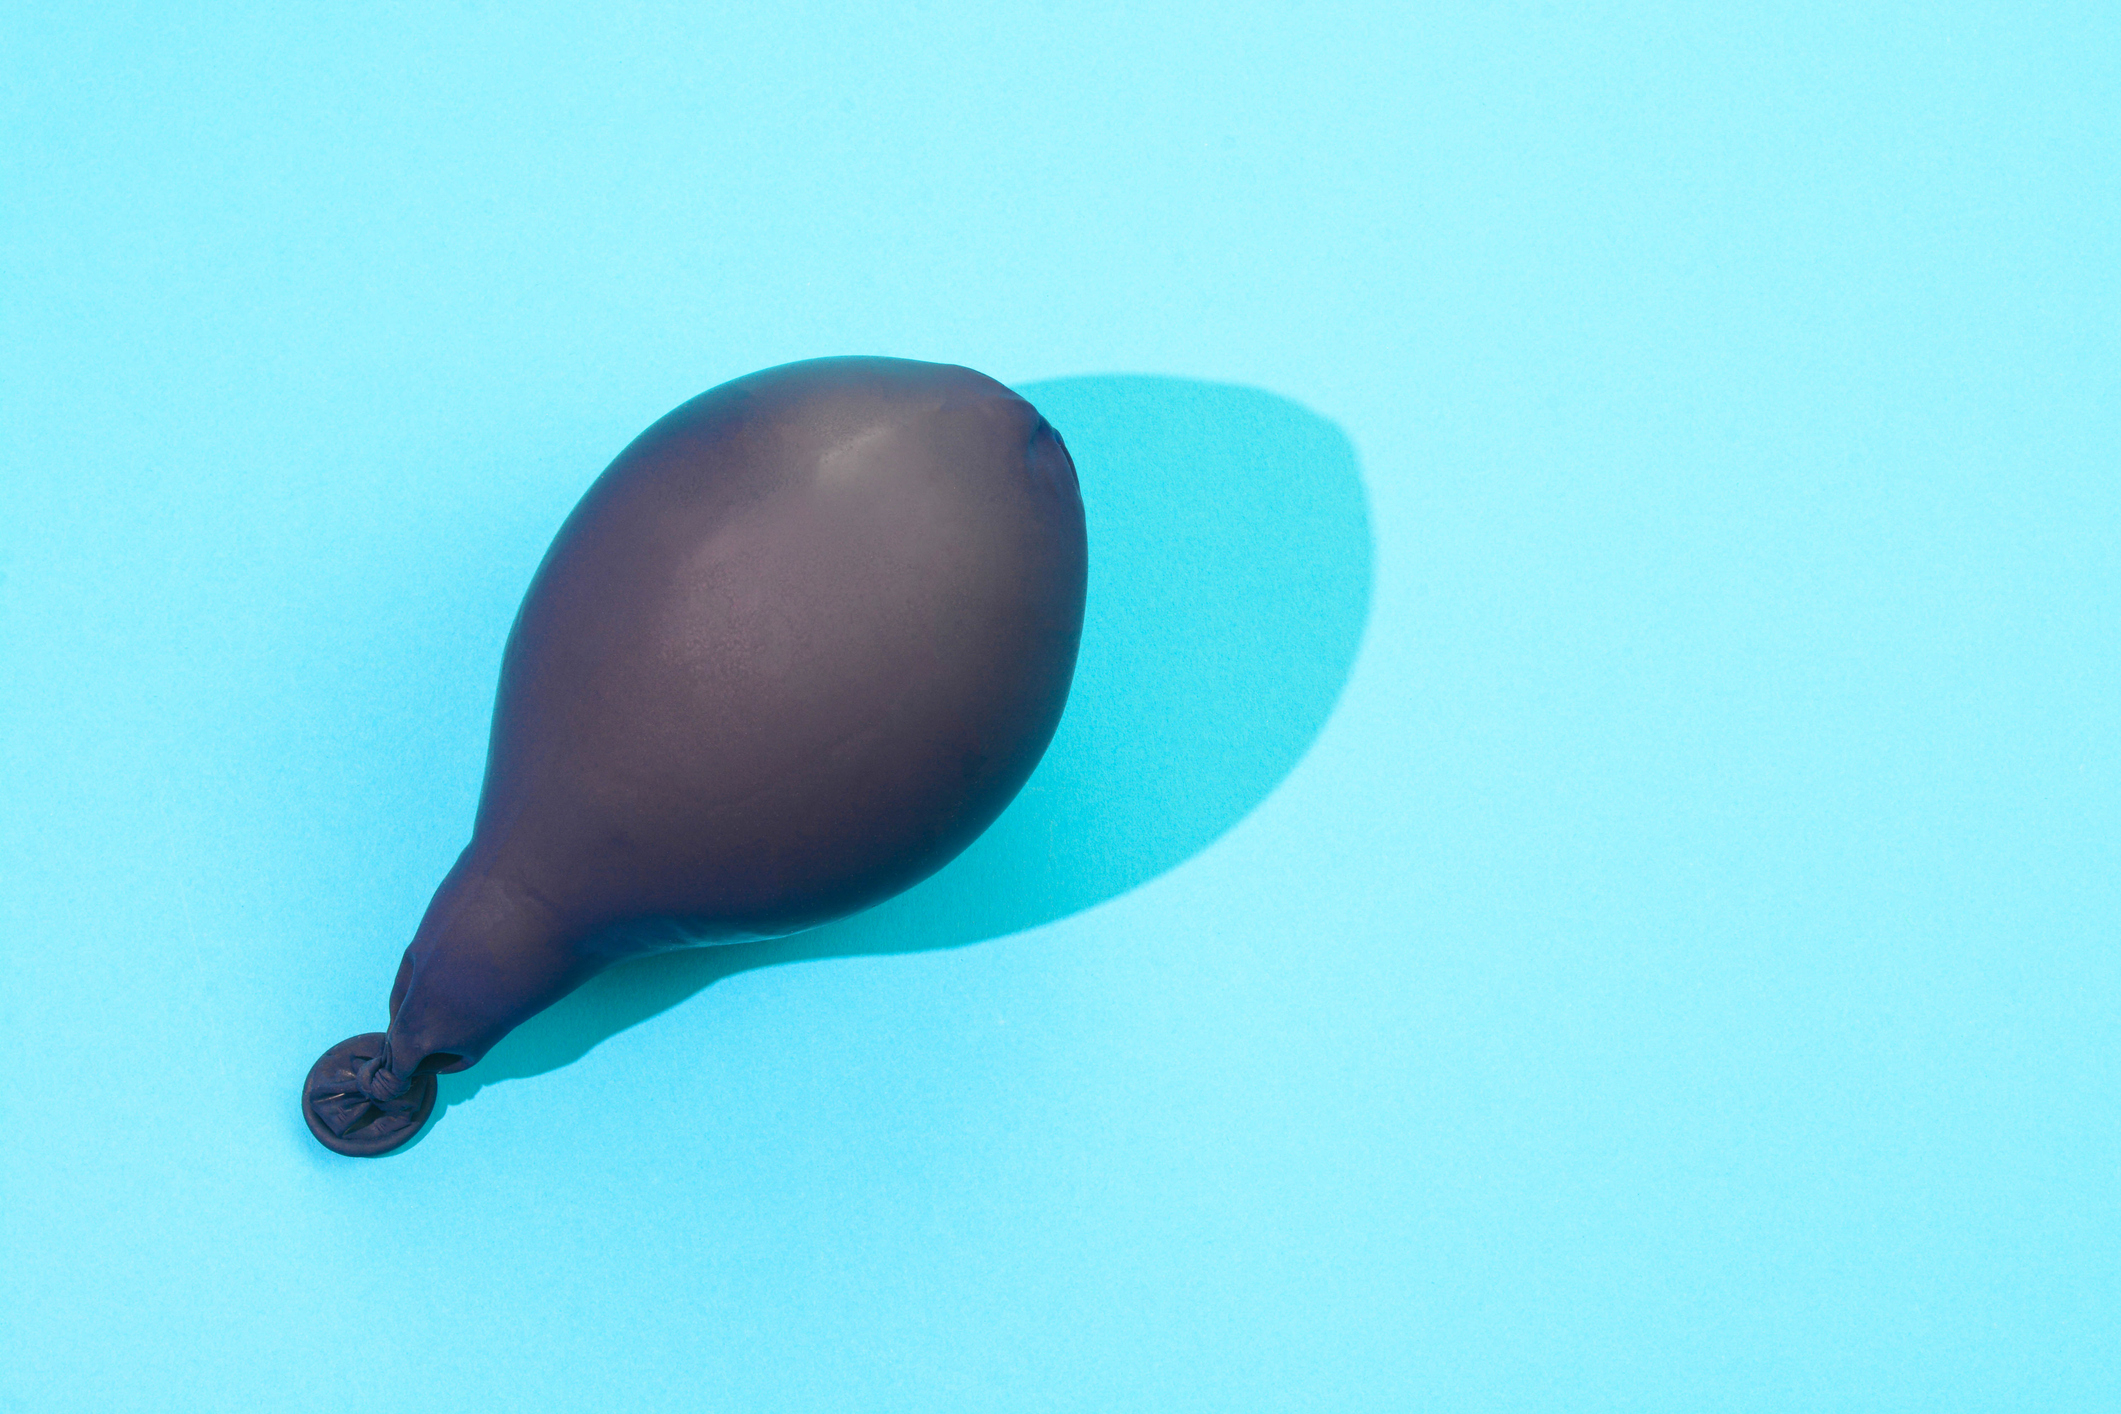 Inflated balloon on a plain surface, relevant to an article on Sex &amp; Love